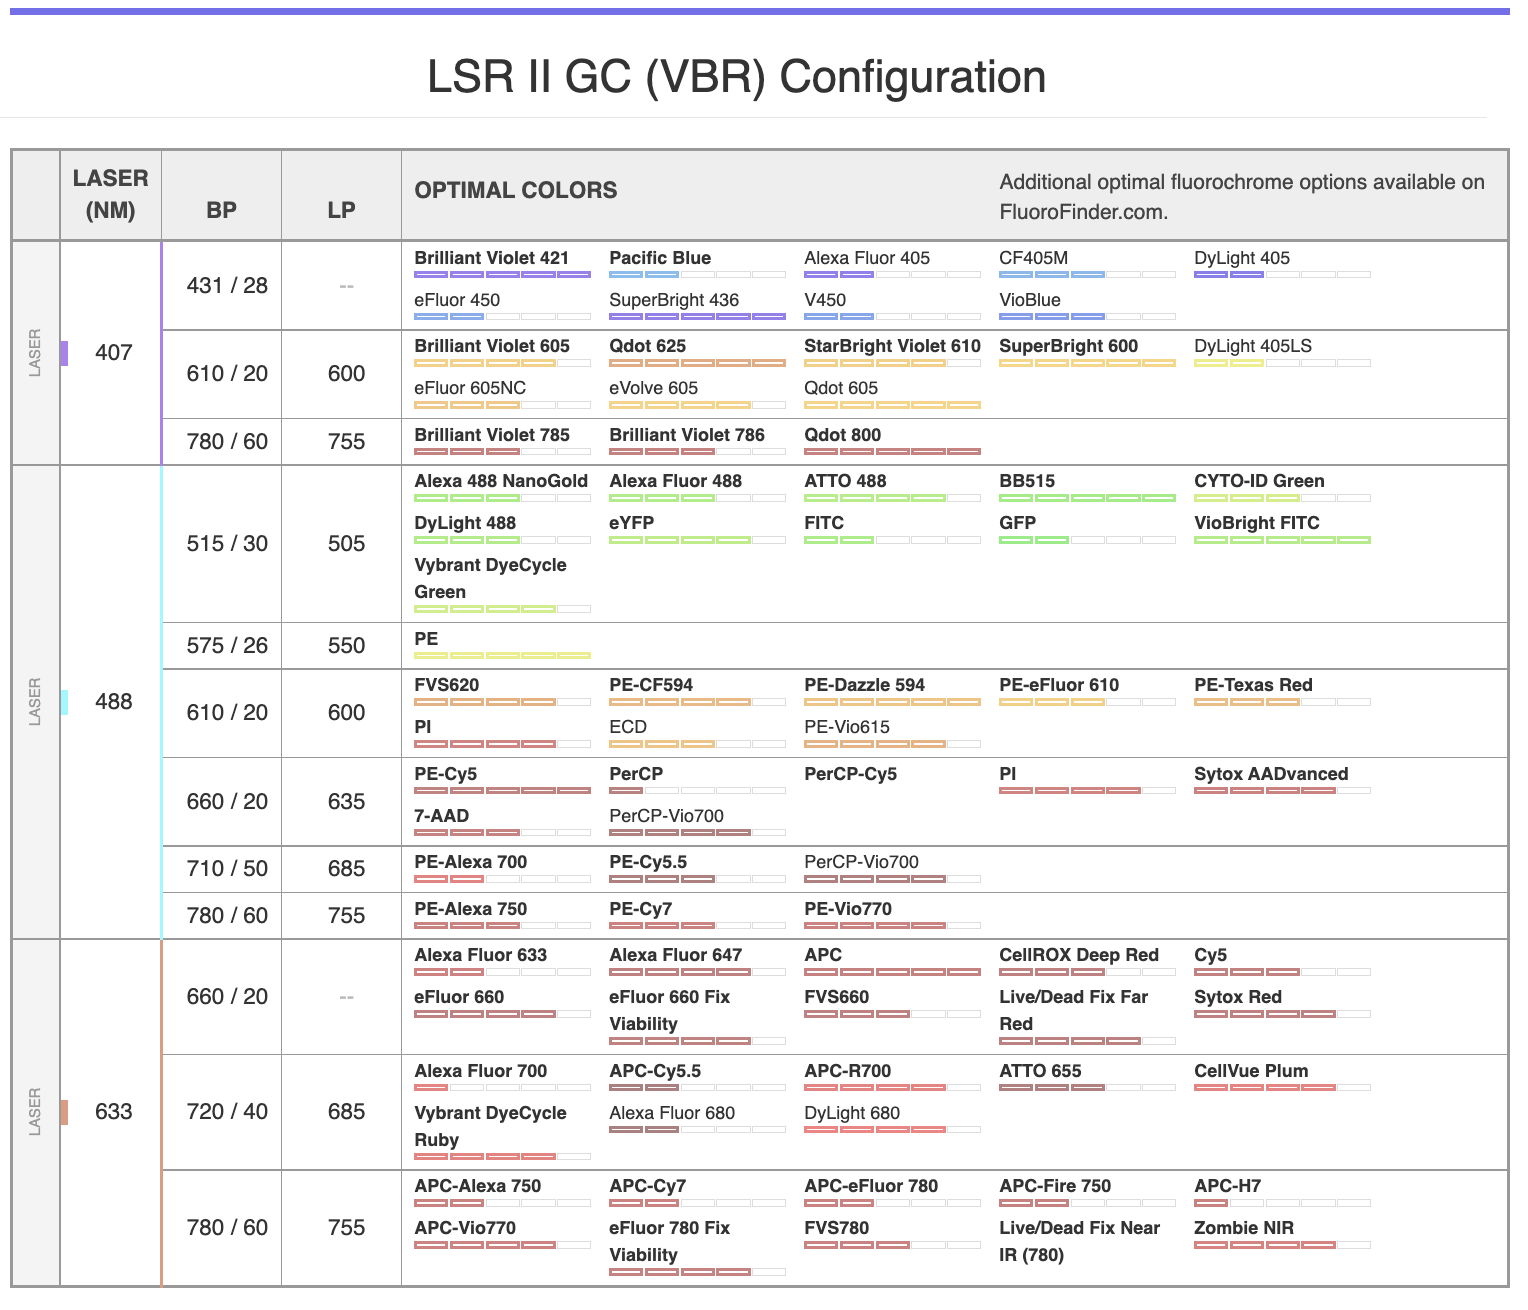 Advanced configuration for LSRII GC